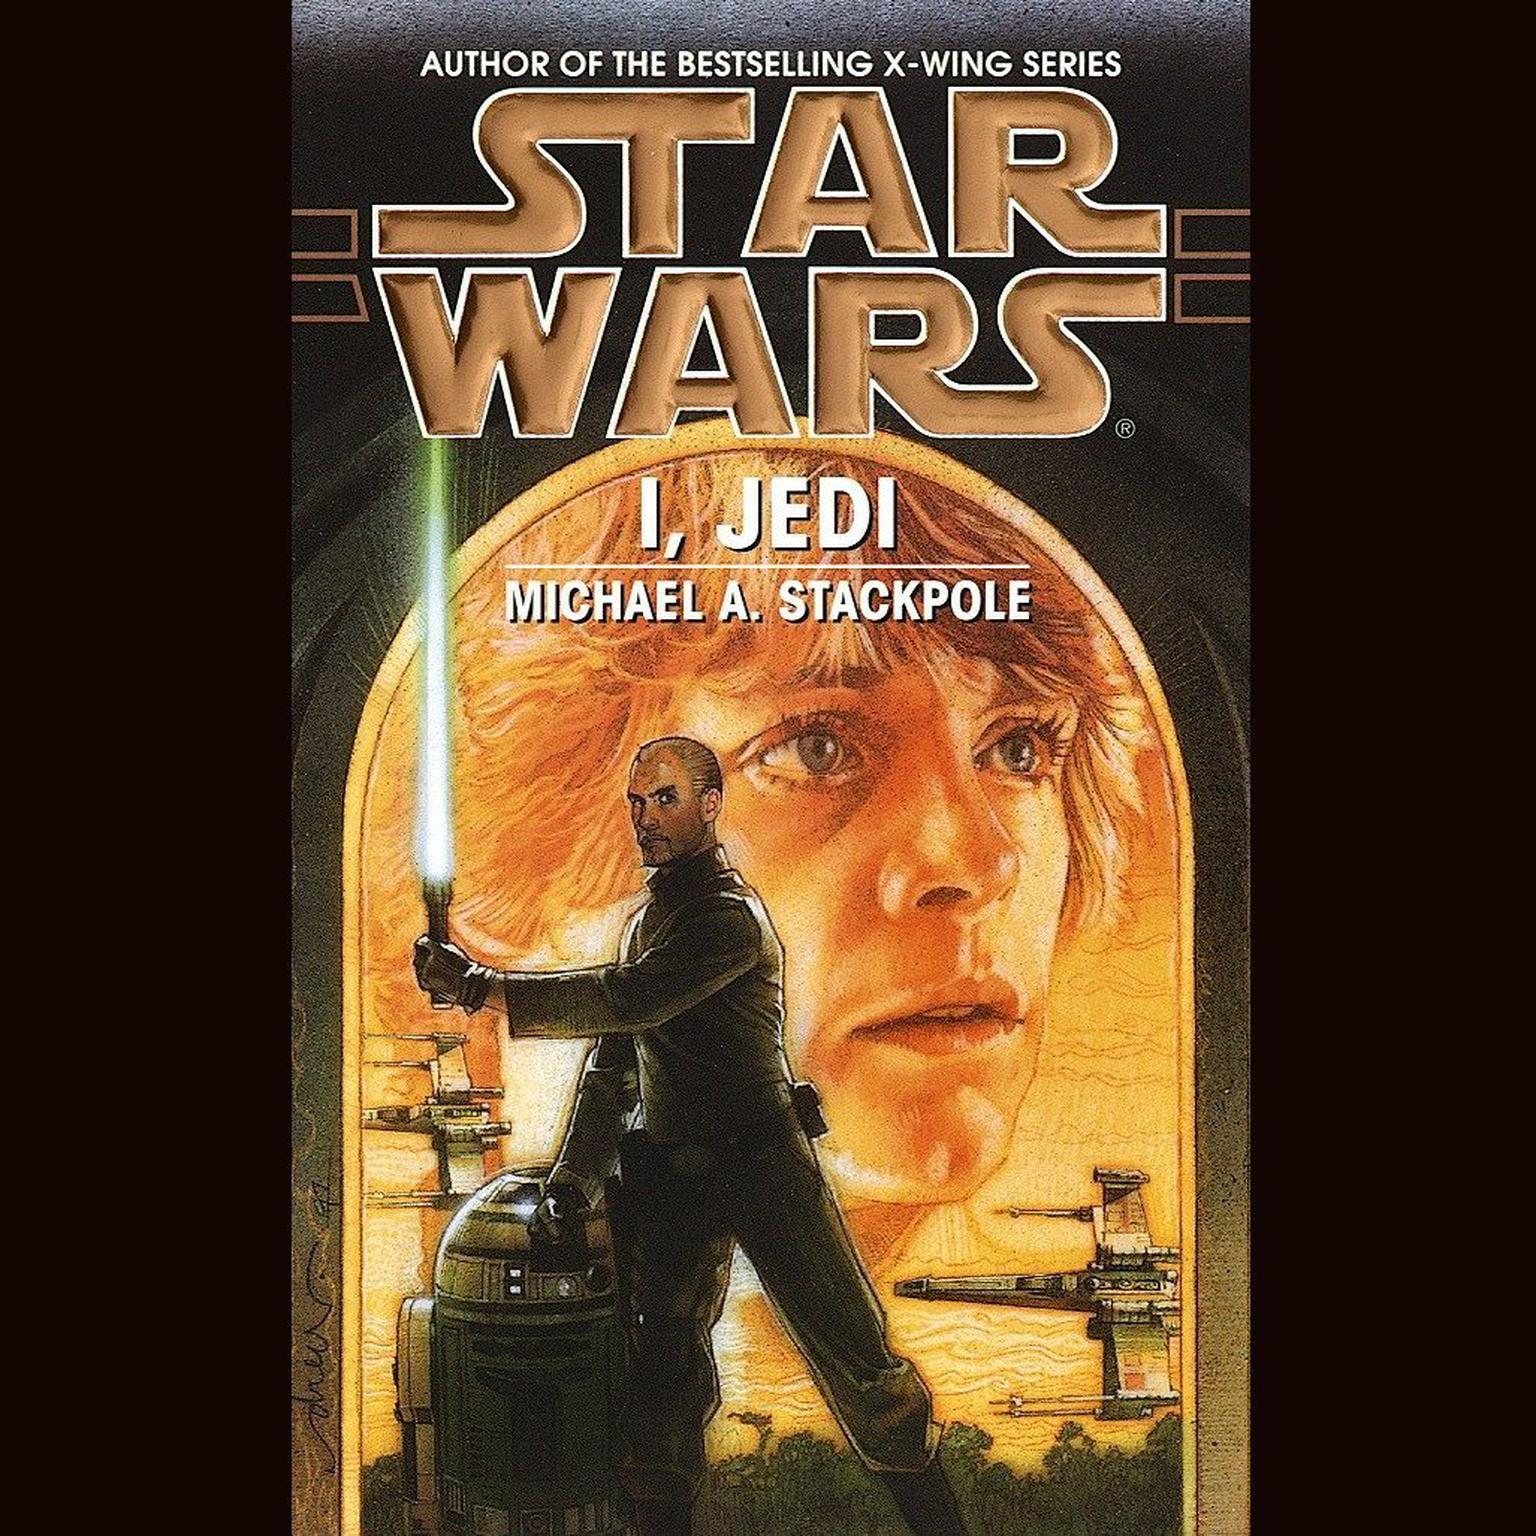 Star Wars: I, Jedi (Abridged) Audiobook, by Michael A. Stackpole